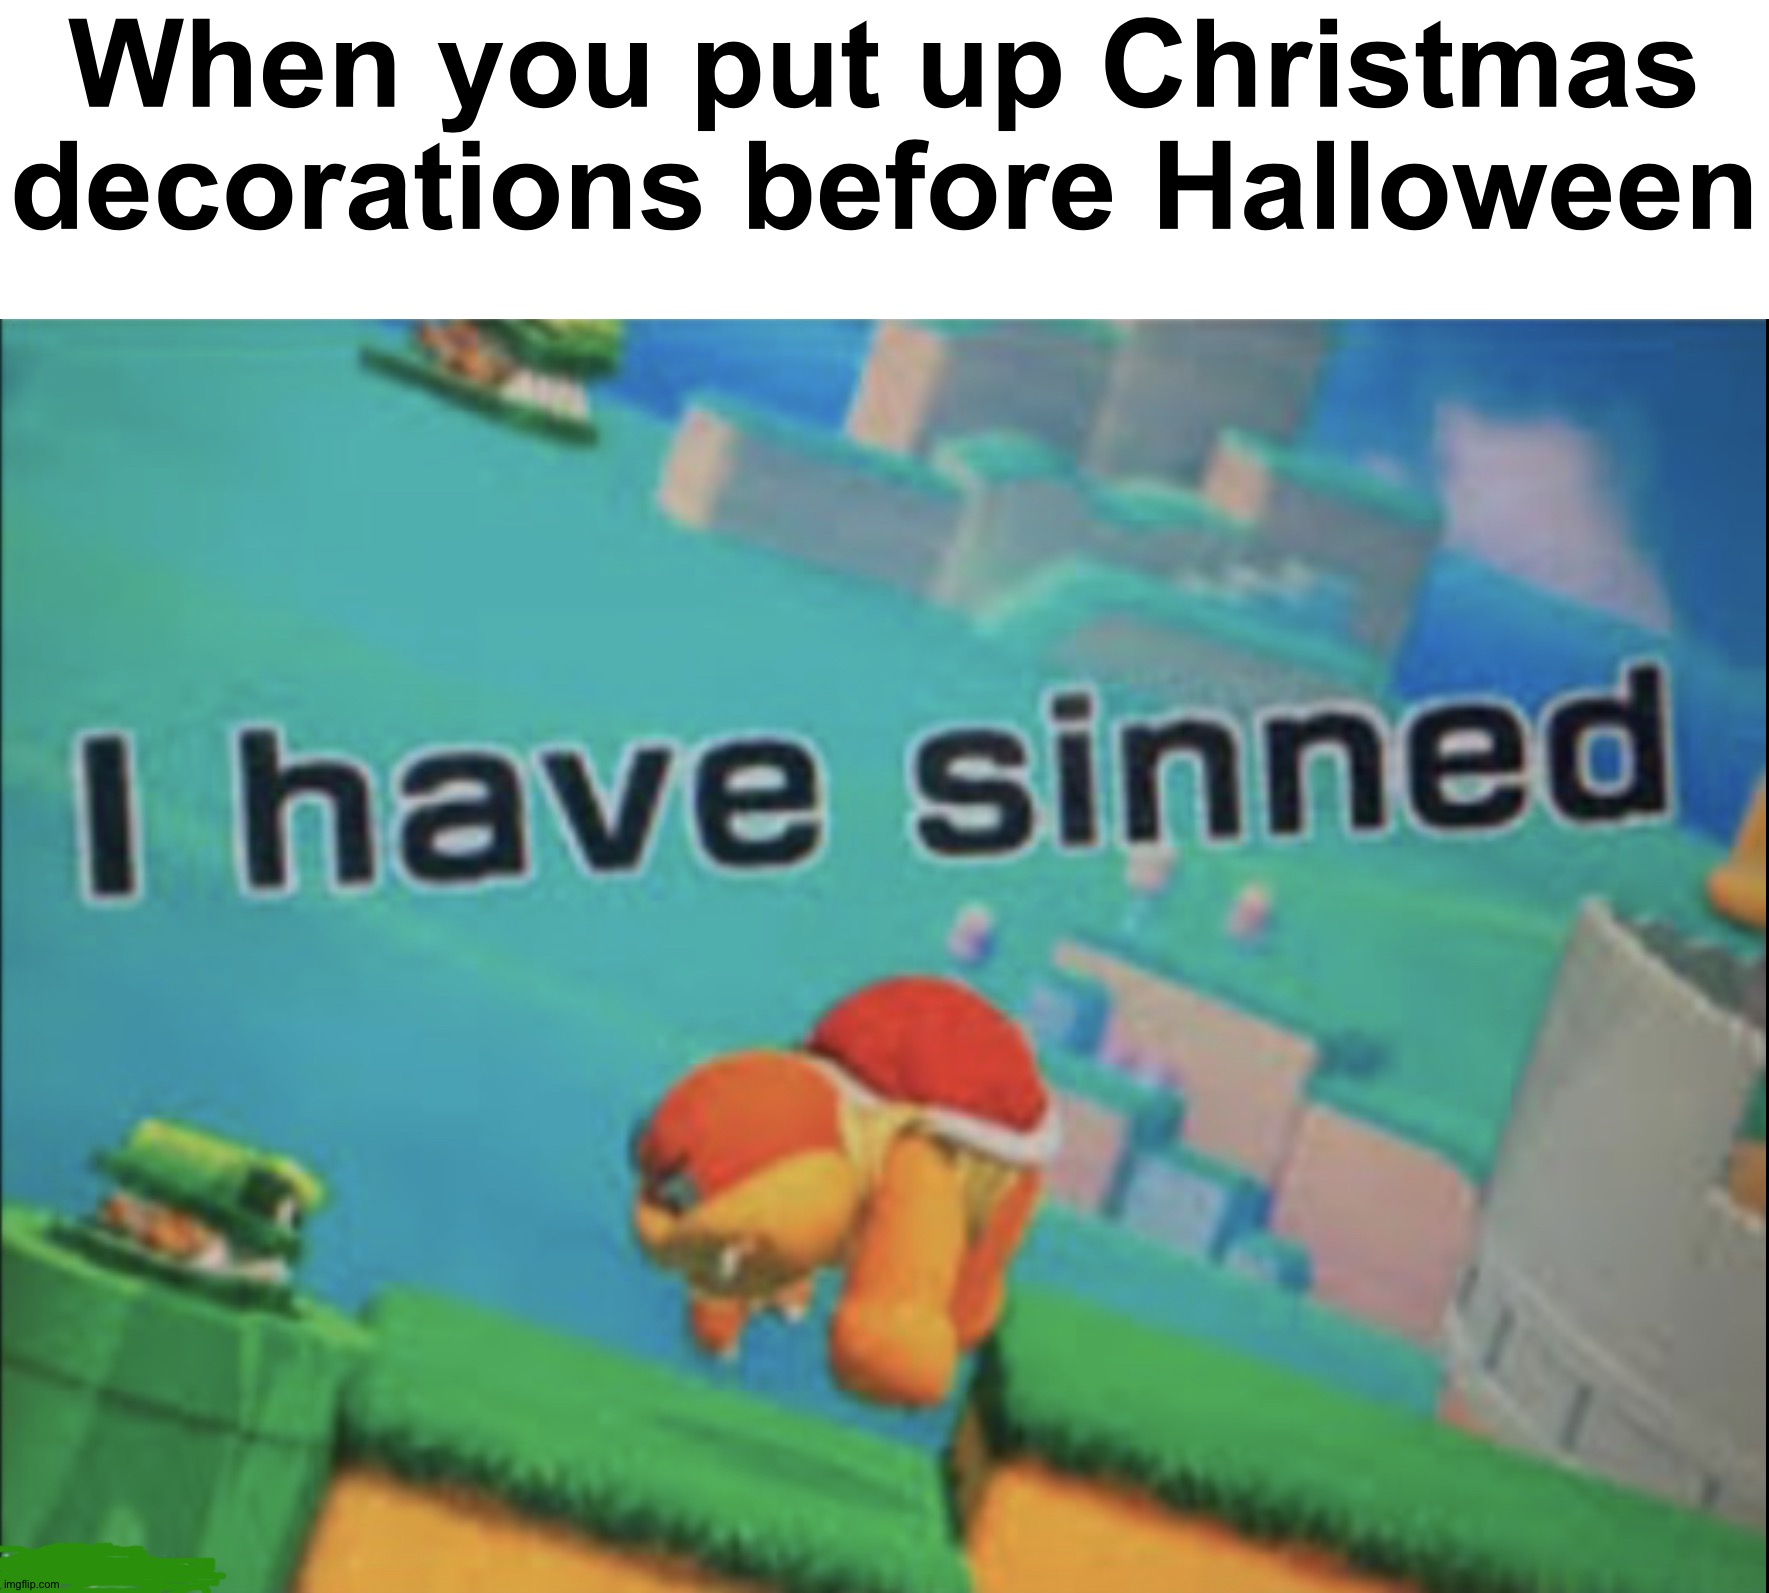 Always put up decorations after thanksgiving |  When you put up Christmas decorations before Halloween | image tagged in i have sinned,memes,funny,funny memes,christmas,spooktober | made w/ Imgflip meme maker